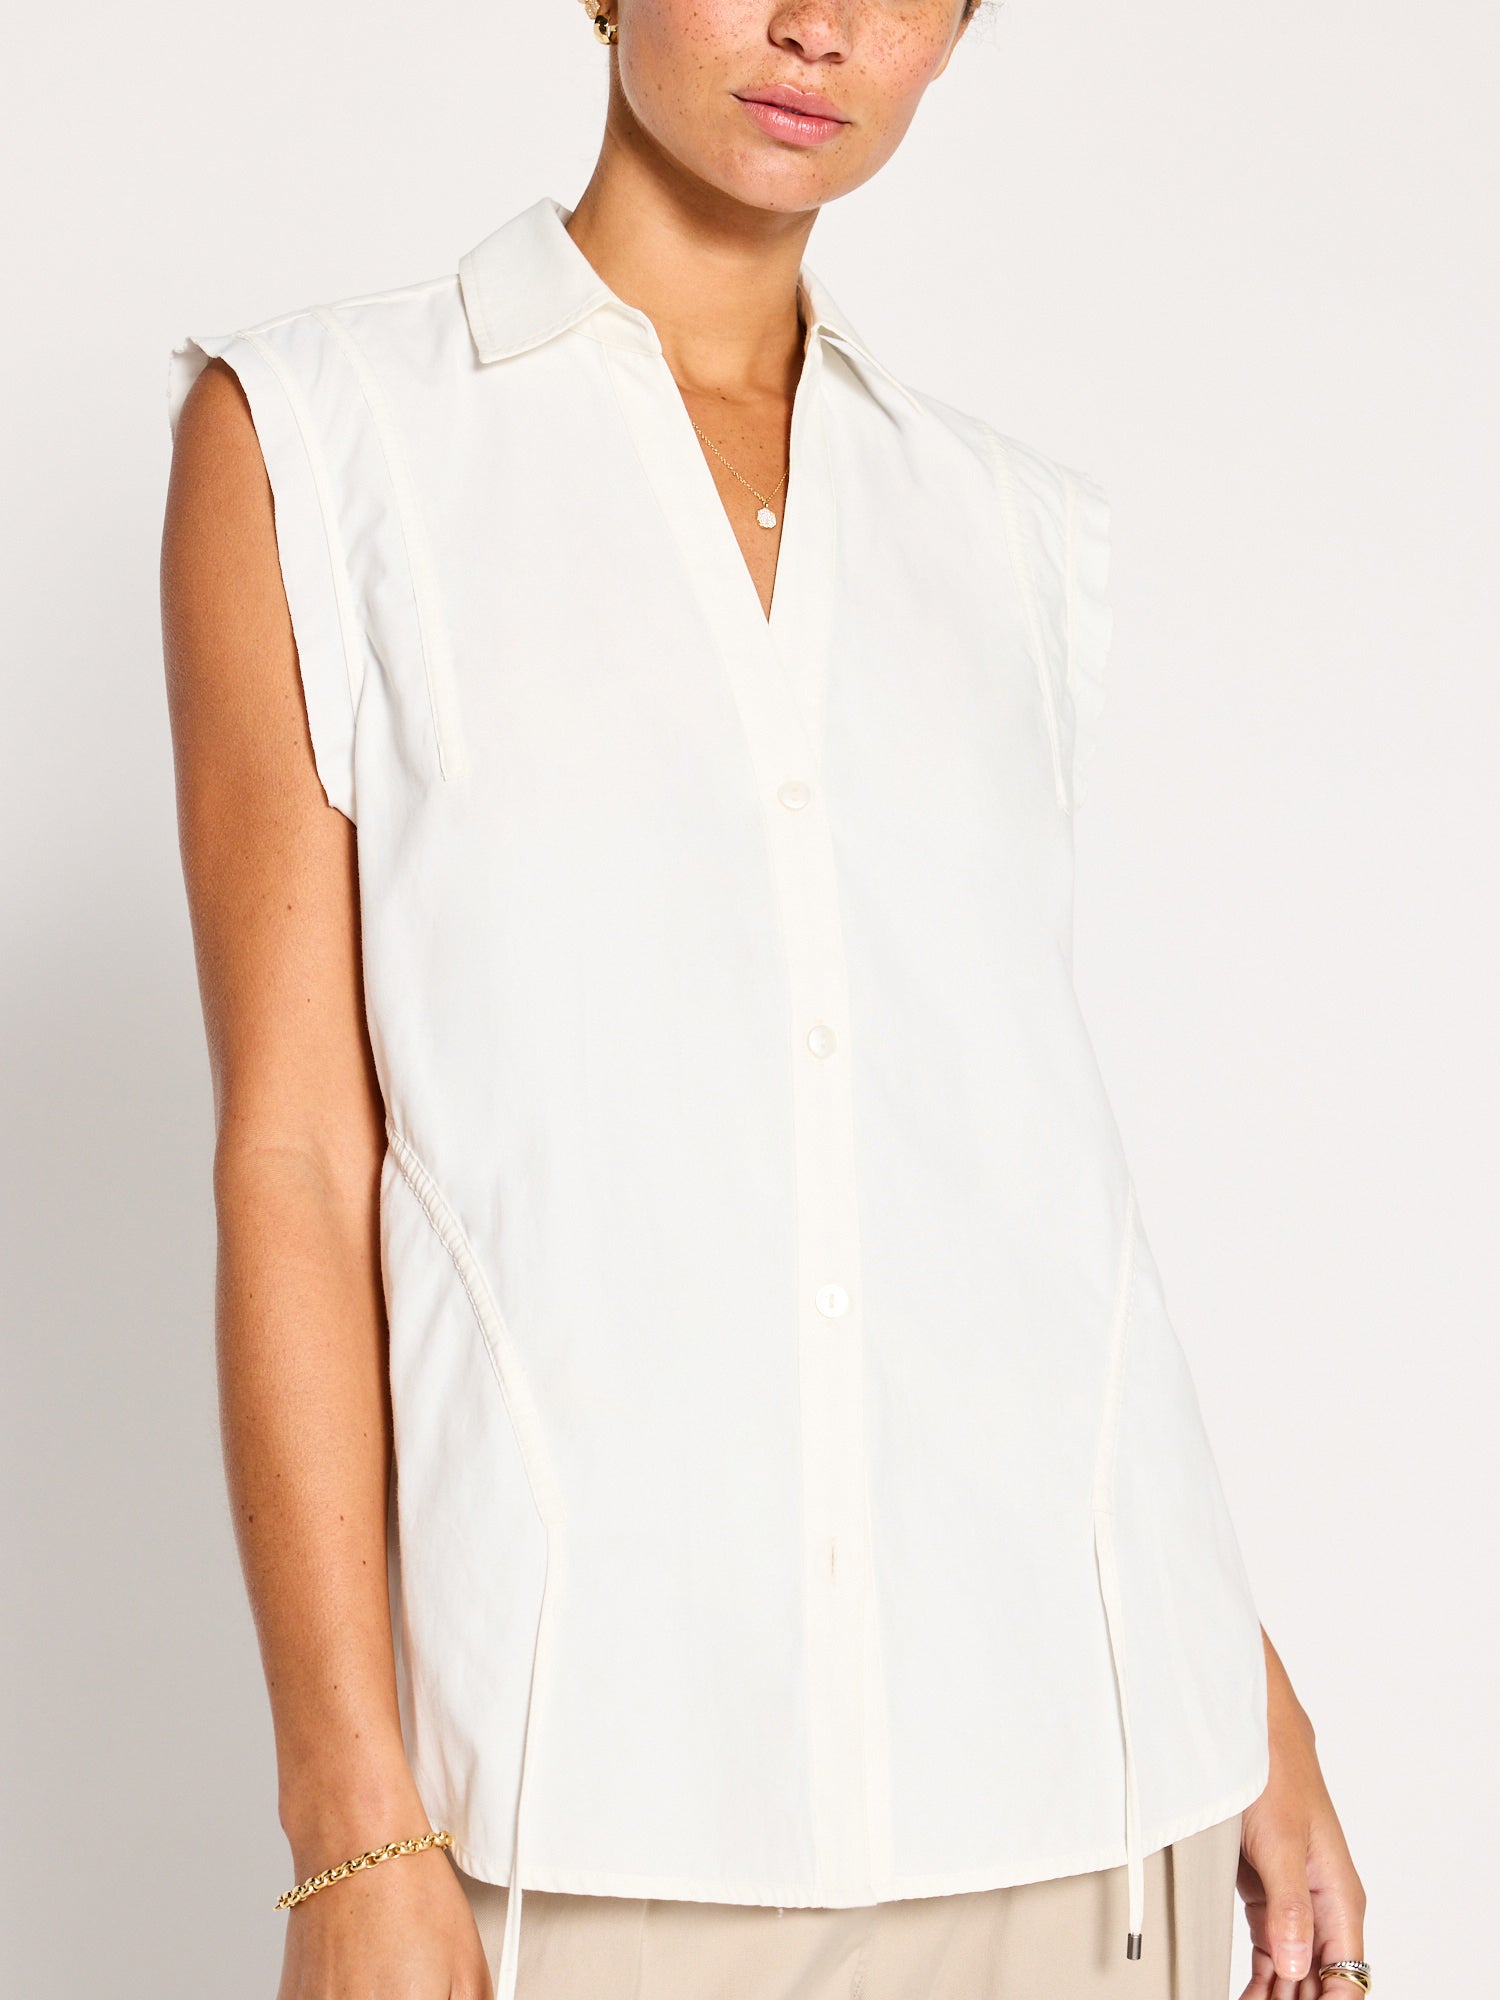 Marcie white sleeveless button up top front view 2